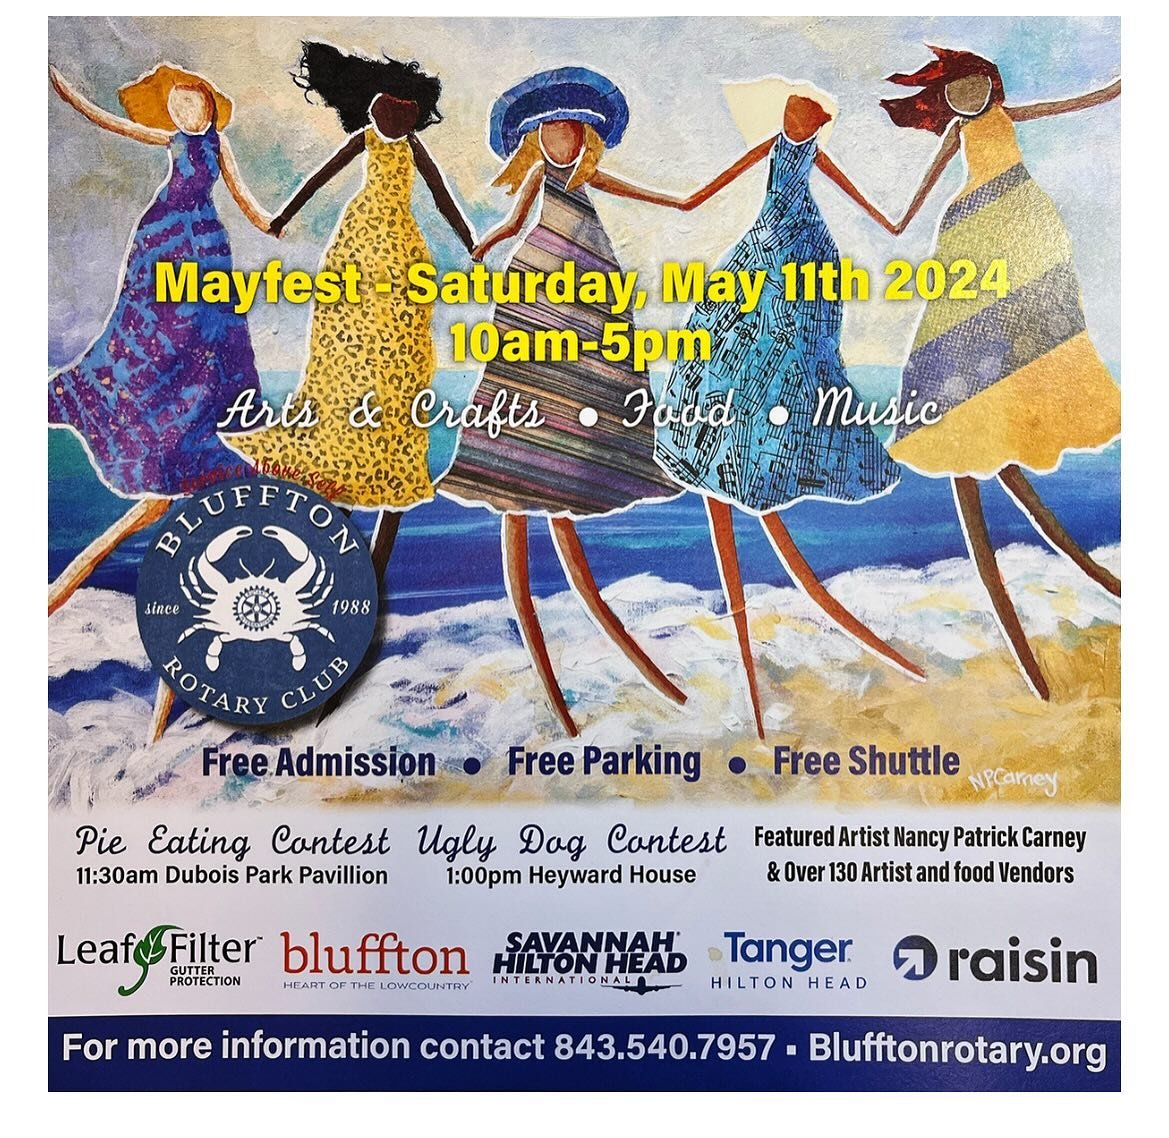 Mayfest today! Come on out to Old Town Bluffton for all the fun. 
I&rsquo;ll be at La Petite Gallerie painting on the porch- stop by and say hi! 
#blufftonarts #blufftonliving #blufftonartsdistrict#shopoldtownbluffton #coastalart #lowcountryliving #b